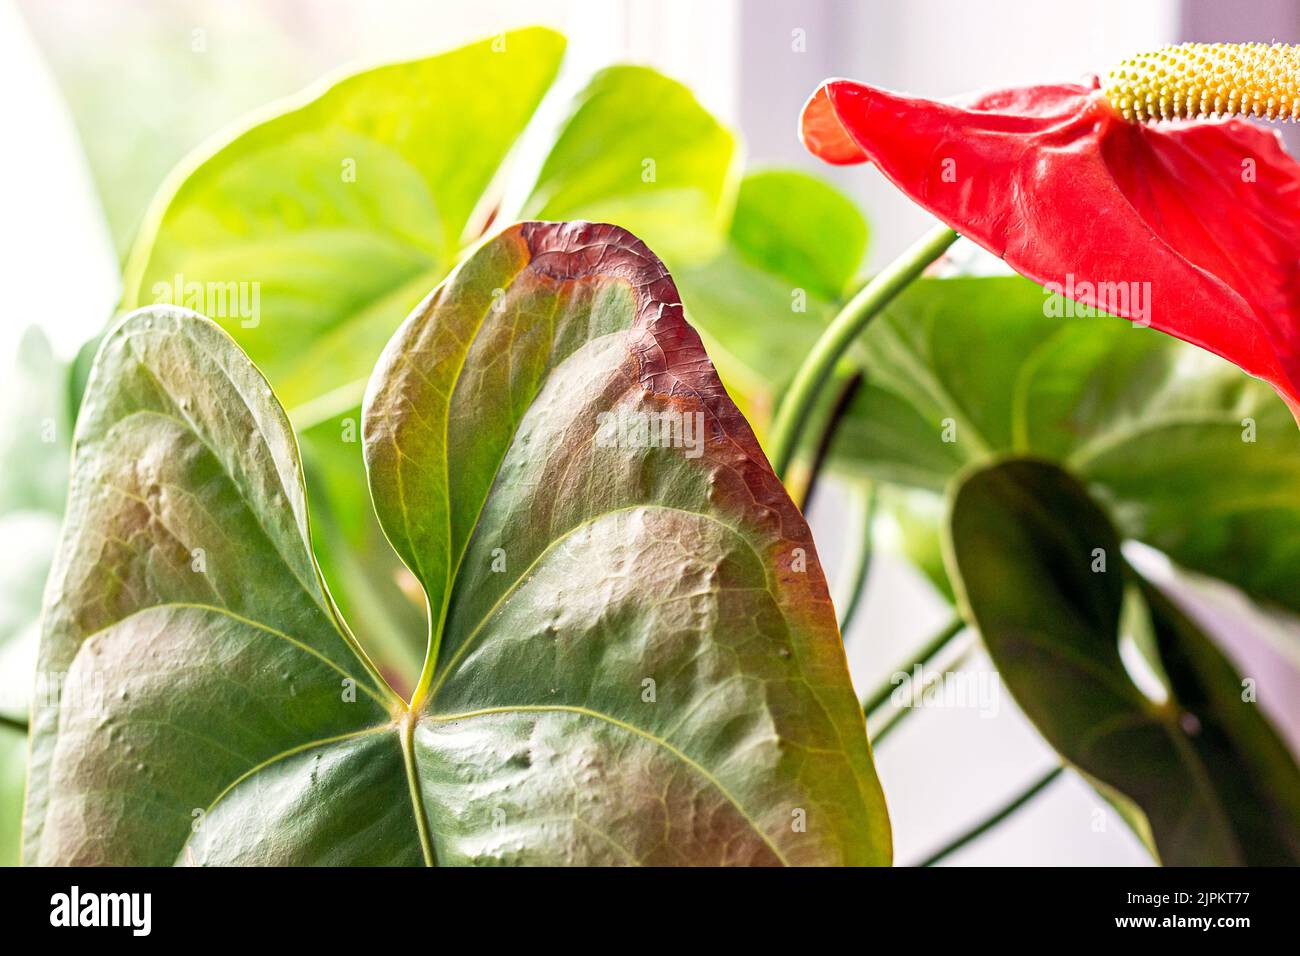 Leaves diseases of Anthurium. Leaves have brown spots and dry. Leaf blight or leaf spot. Indoor Plant Problems. Improper care. Stock Photo